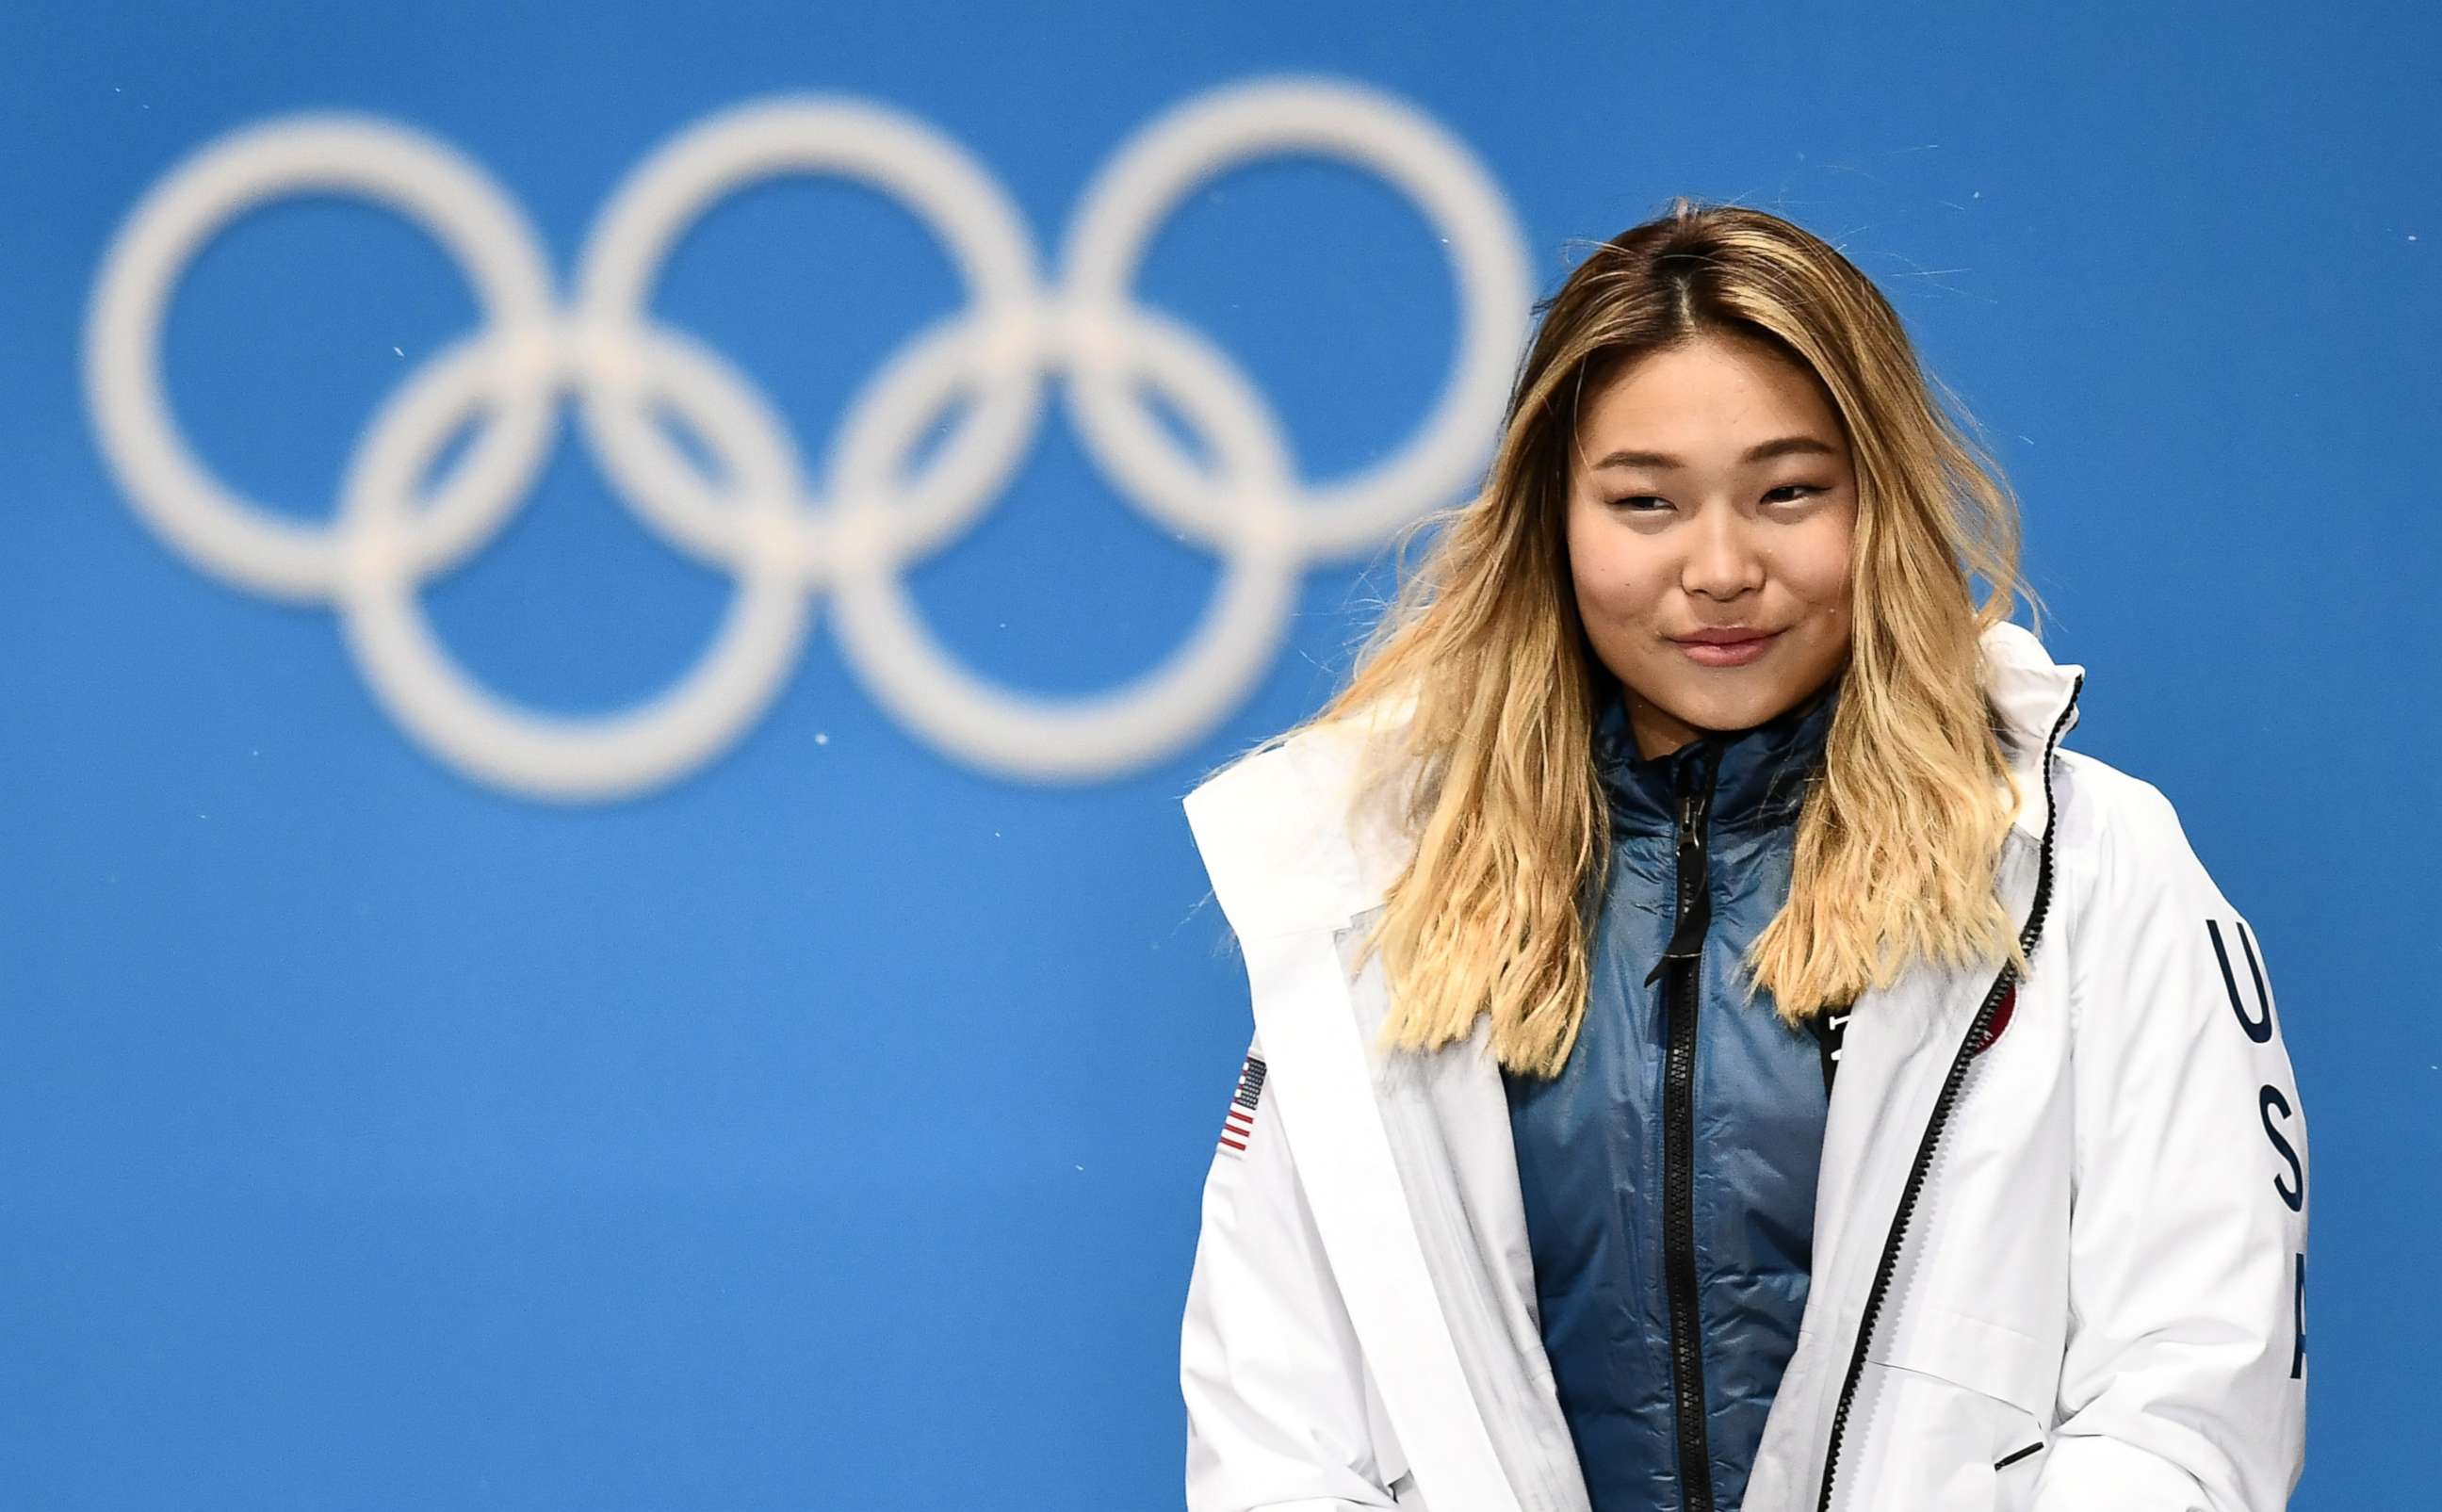 PHOTO: Gold medalist Chloe Kim of the U.S., during the medal ceremony for the women's snowboard halfpipe event, at the PyeongChang 2018 Olympic Games, South Korea, Feb. 13, 2018.
